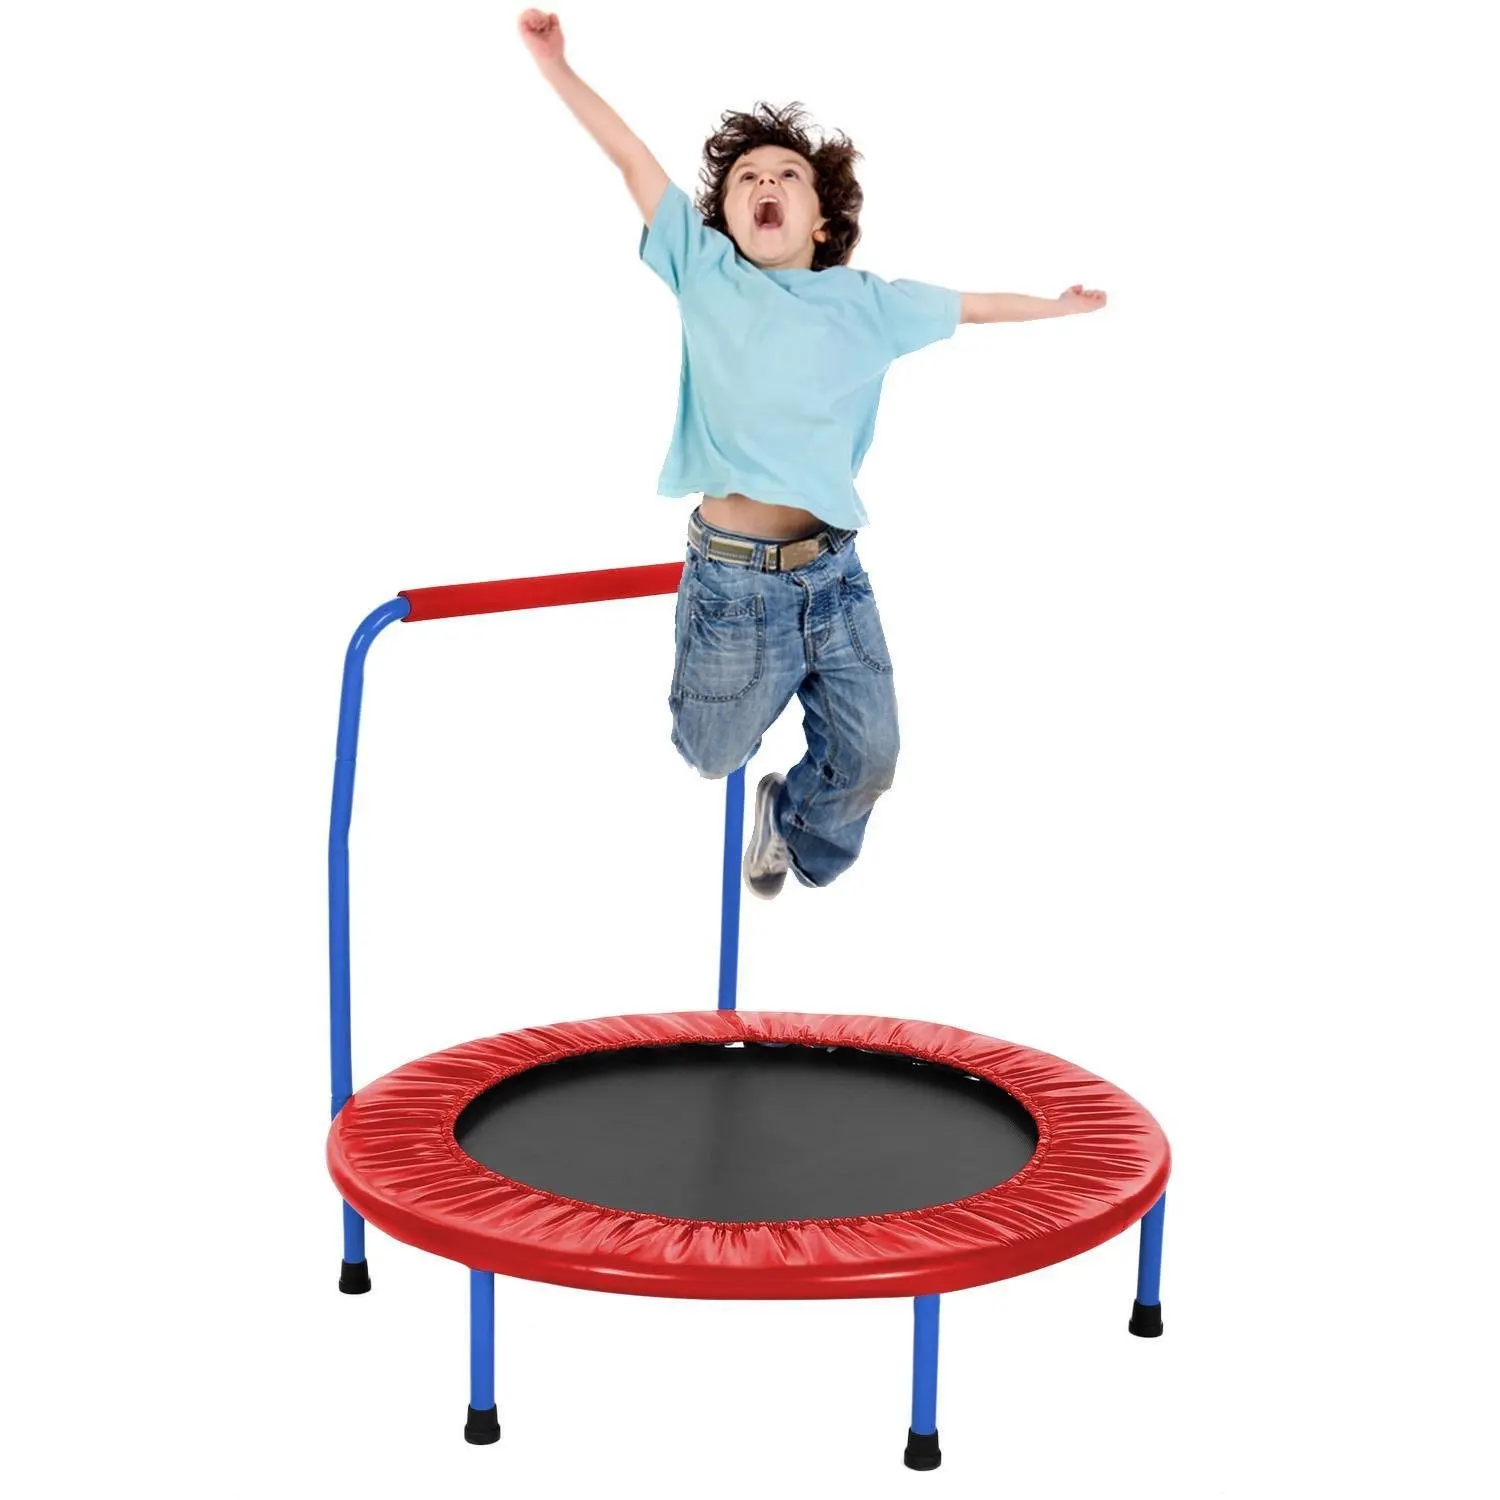 Utheing Kids Trampoline Small Mini Active Jumping Trampoline with Handle